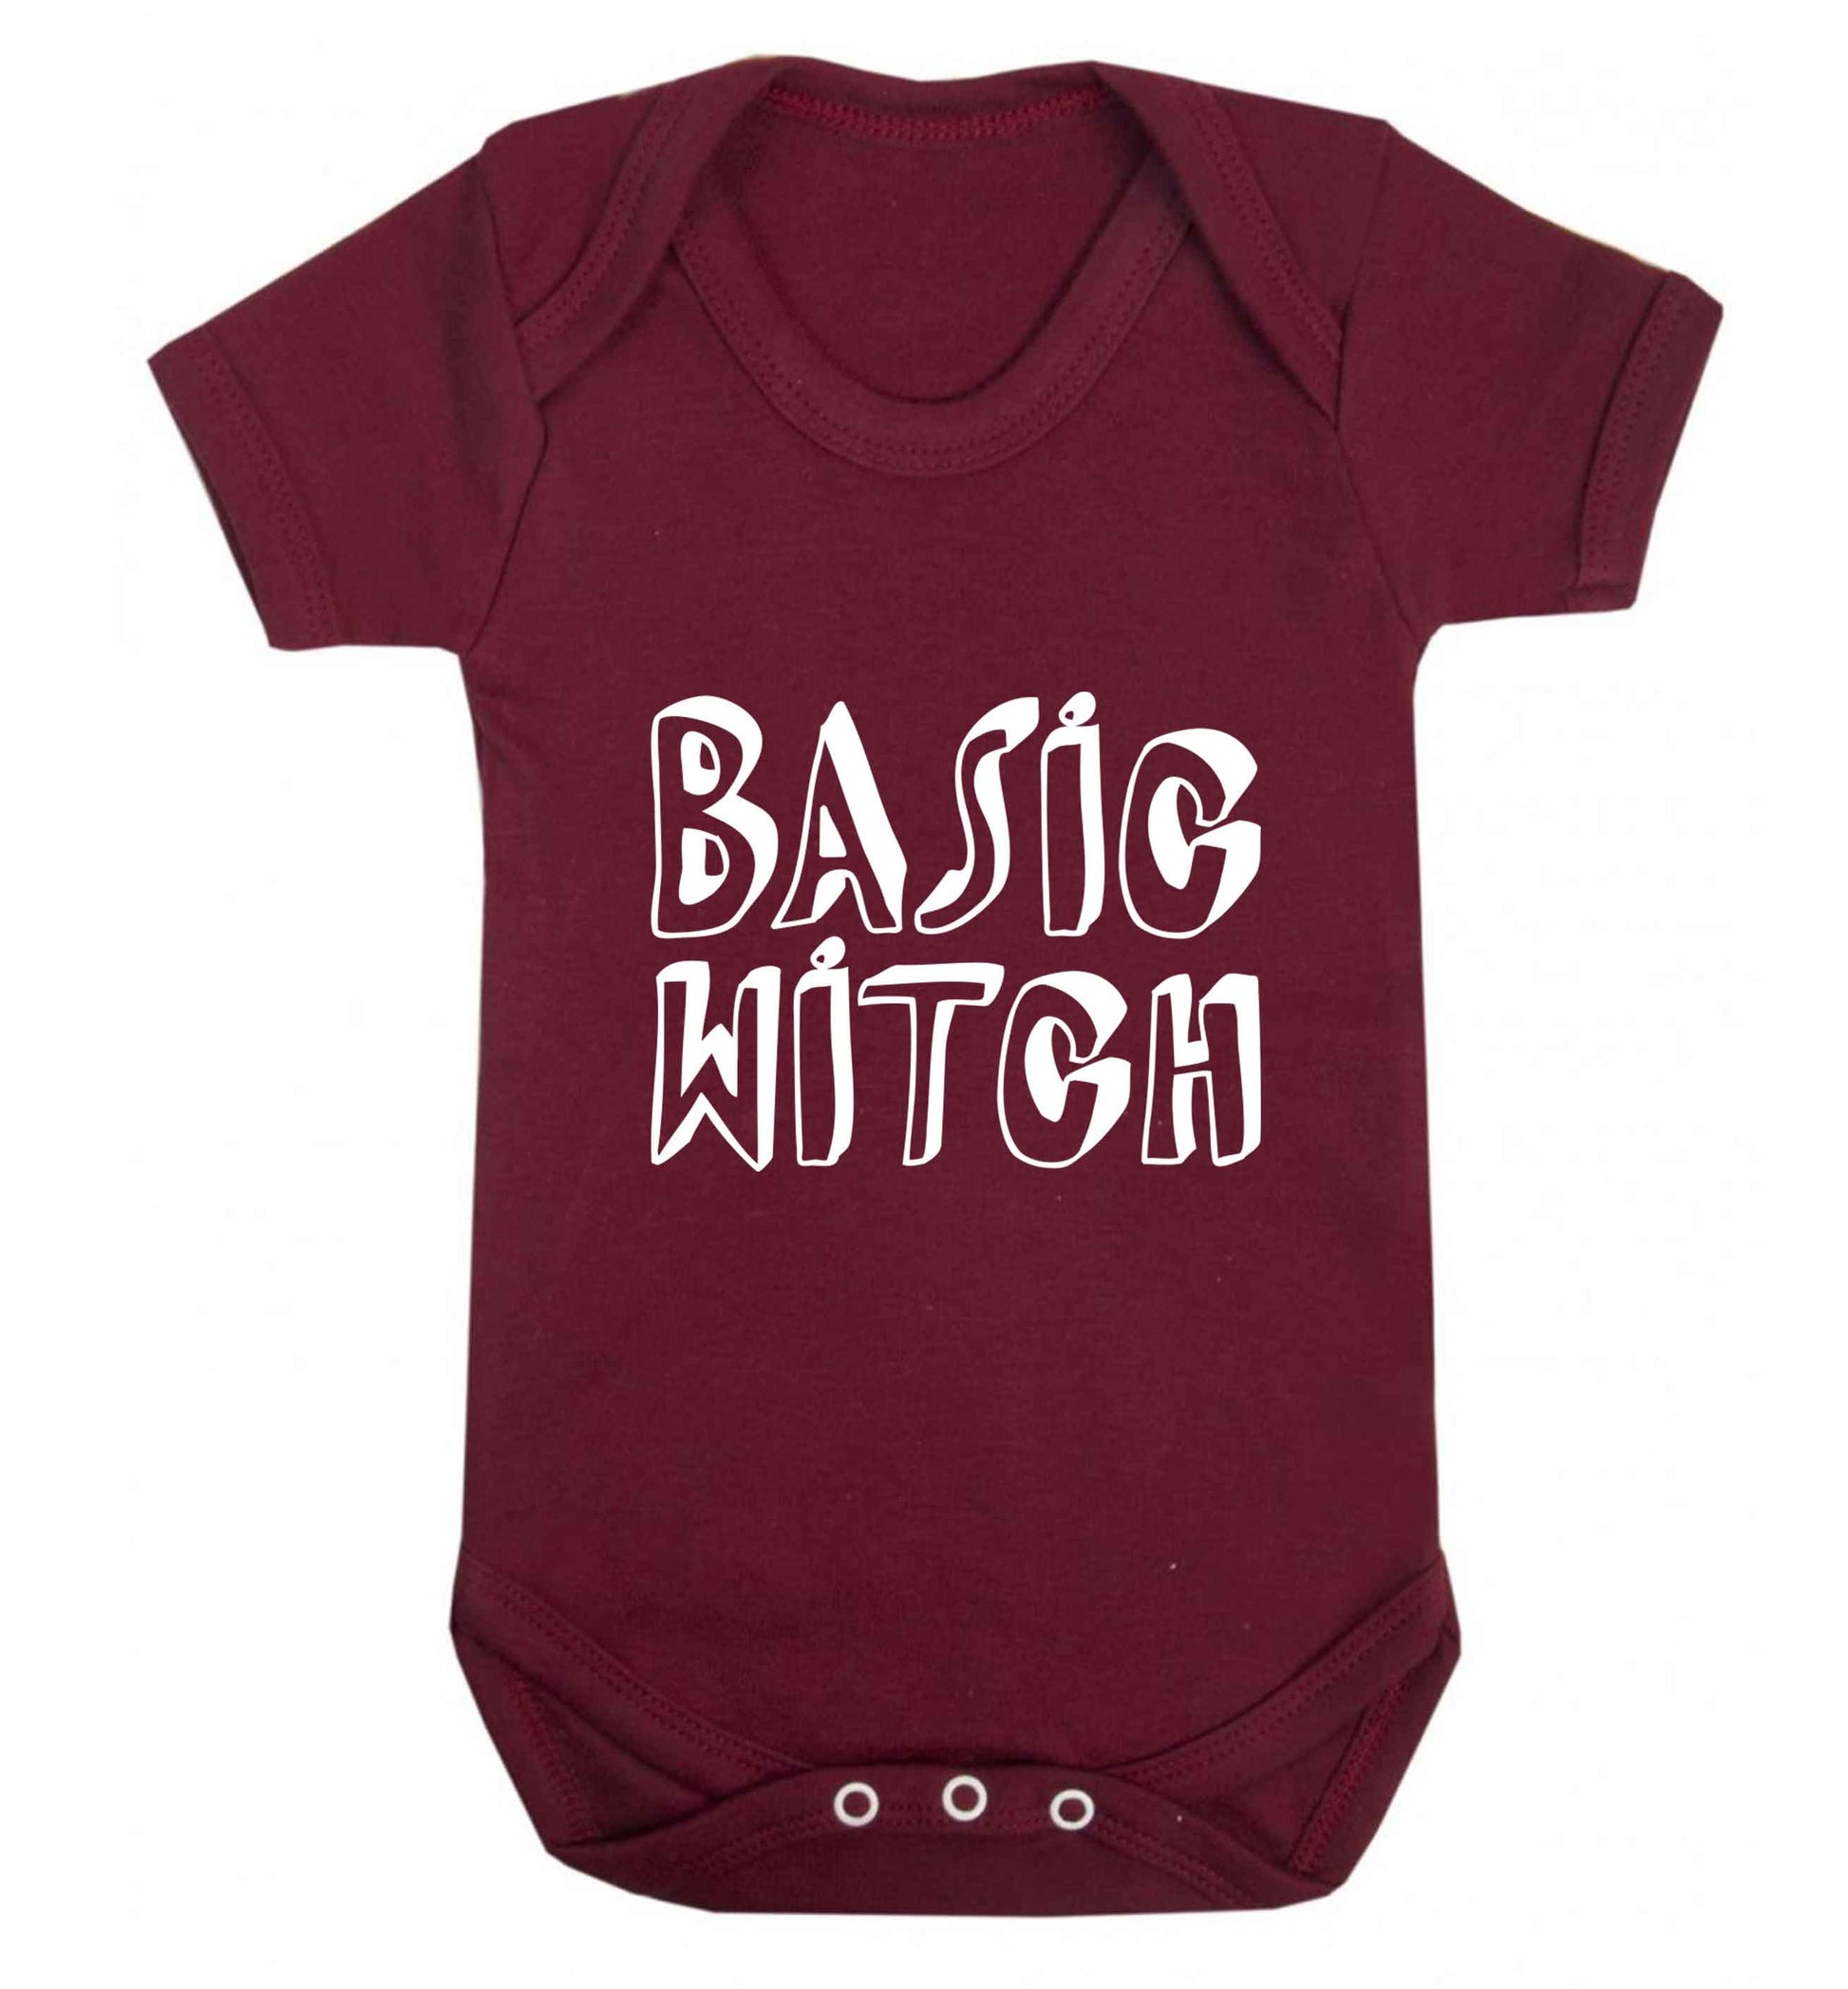 Basic witch baby vest maroon 18-24 months